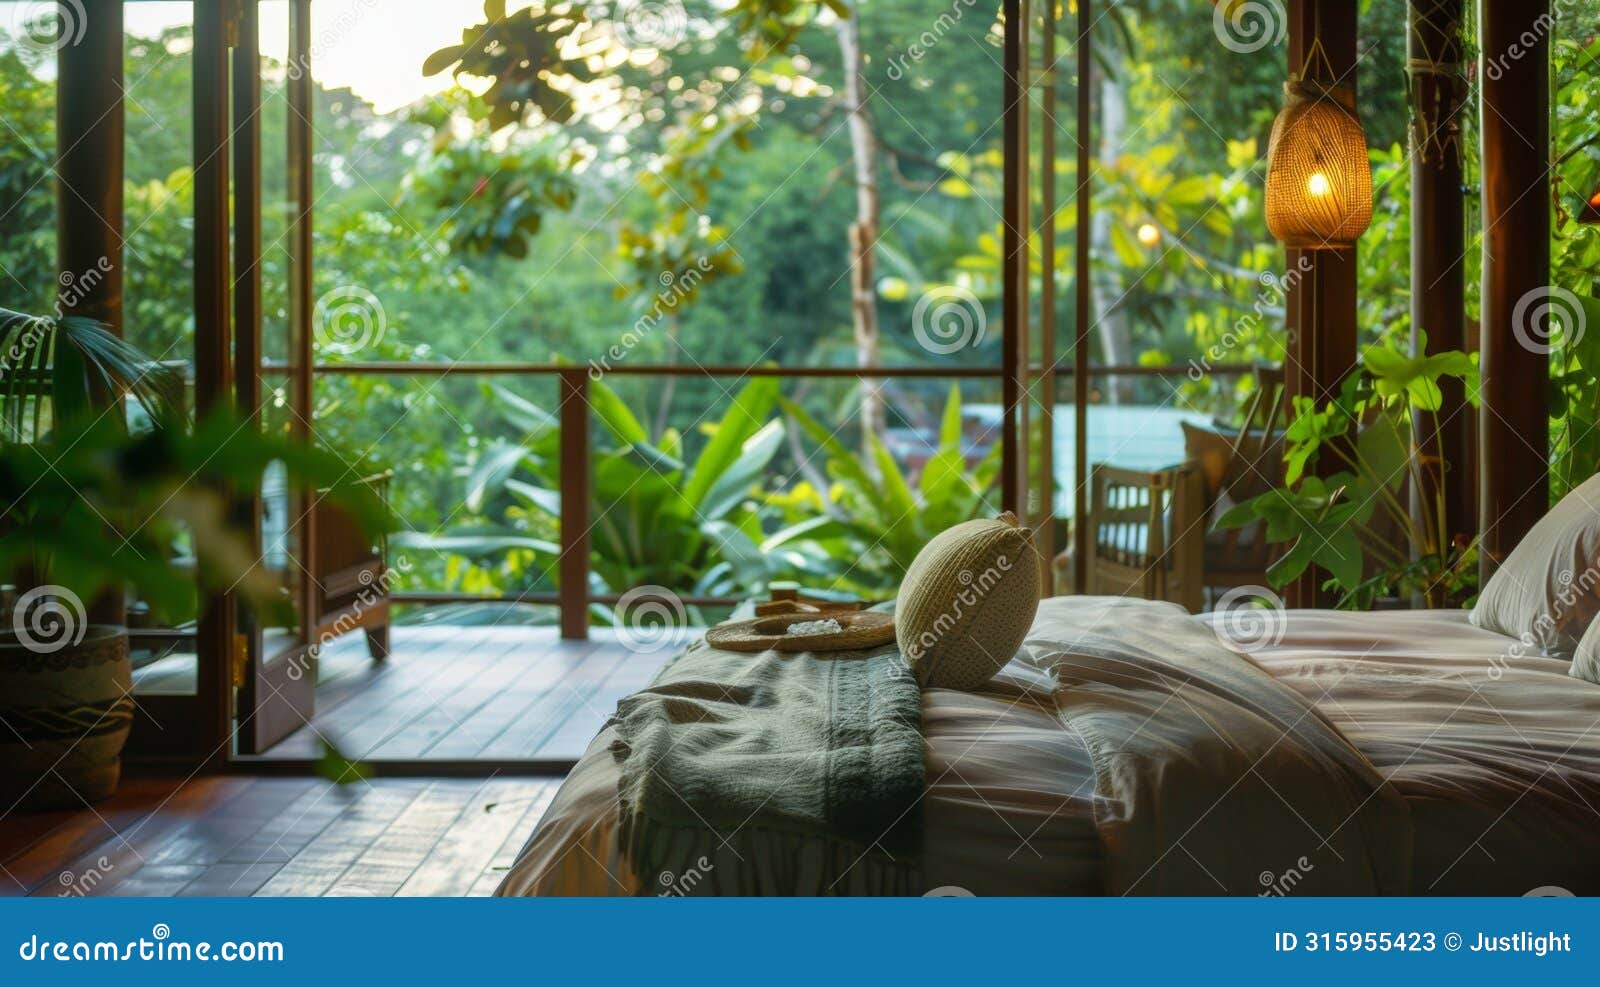 waking up to the peaceful sound of birdsong surrounded by lush greenery is the perfect start to a restful day at the